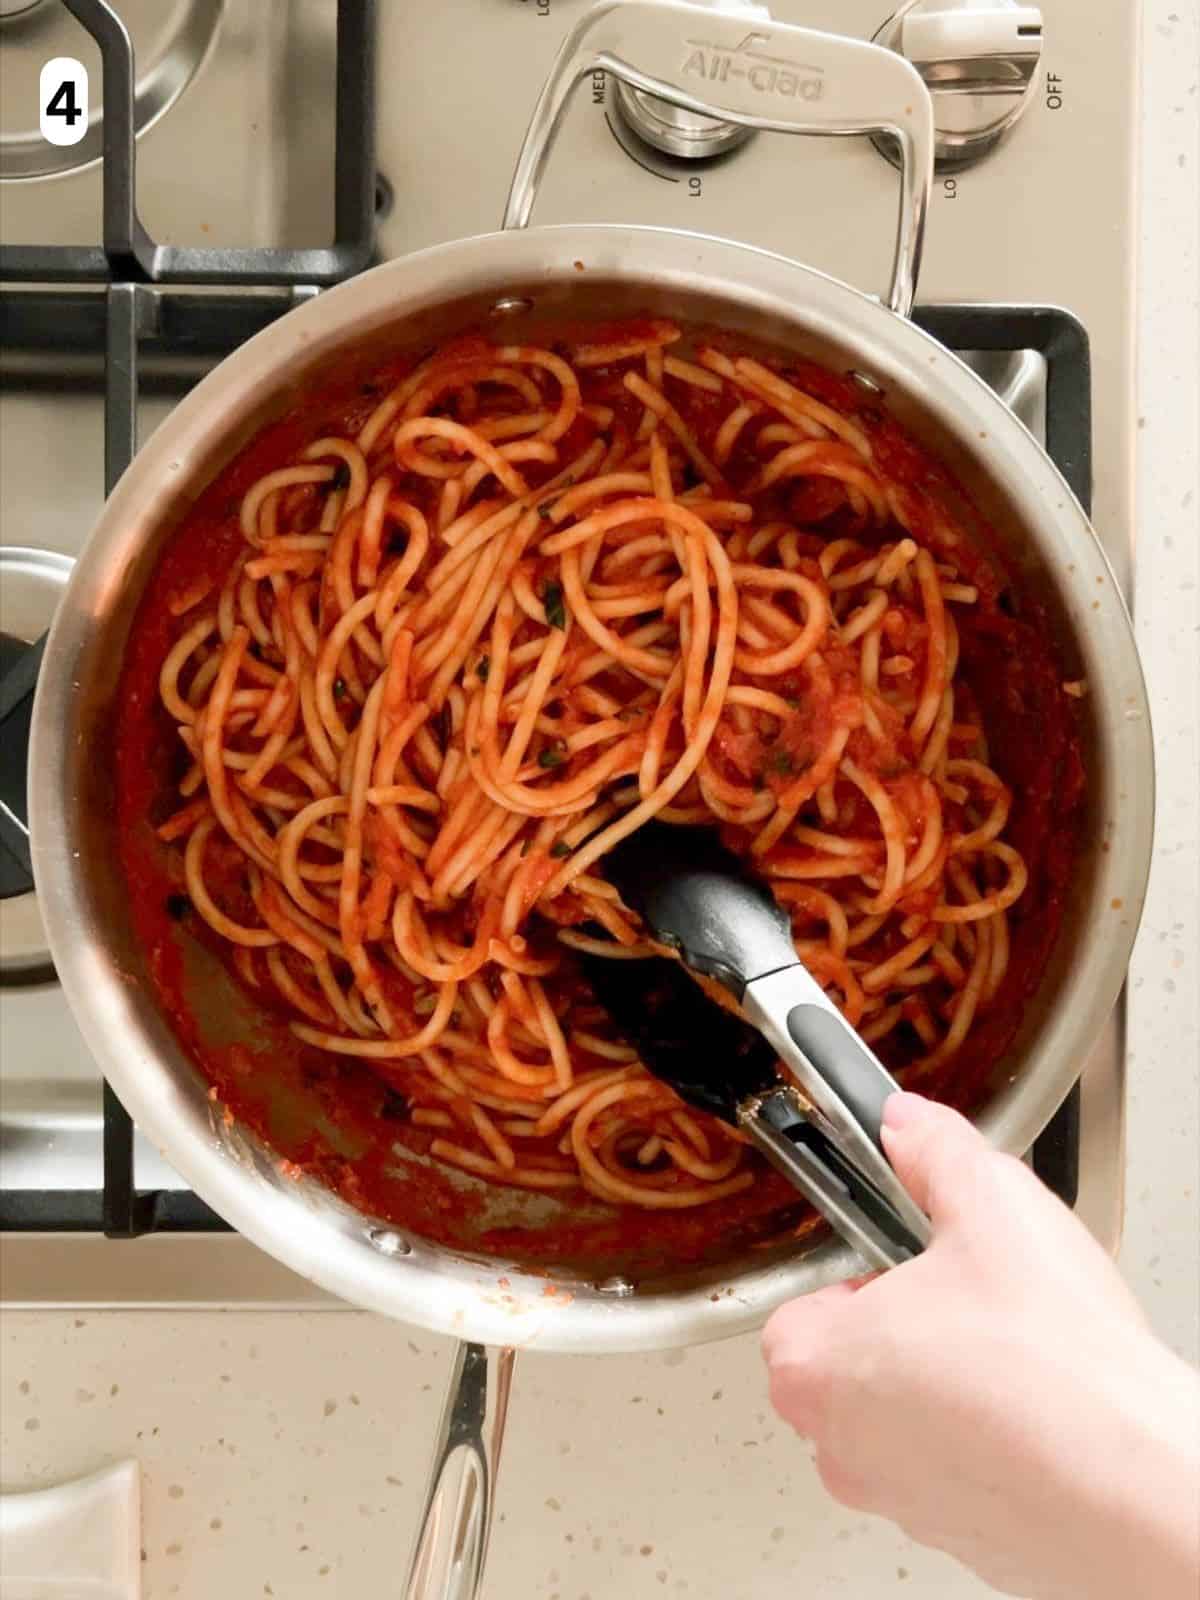 Bucatini and pomodoro sauce are mixed together in a pan.